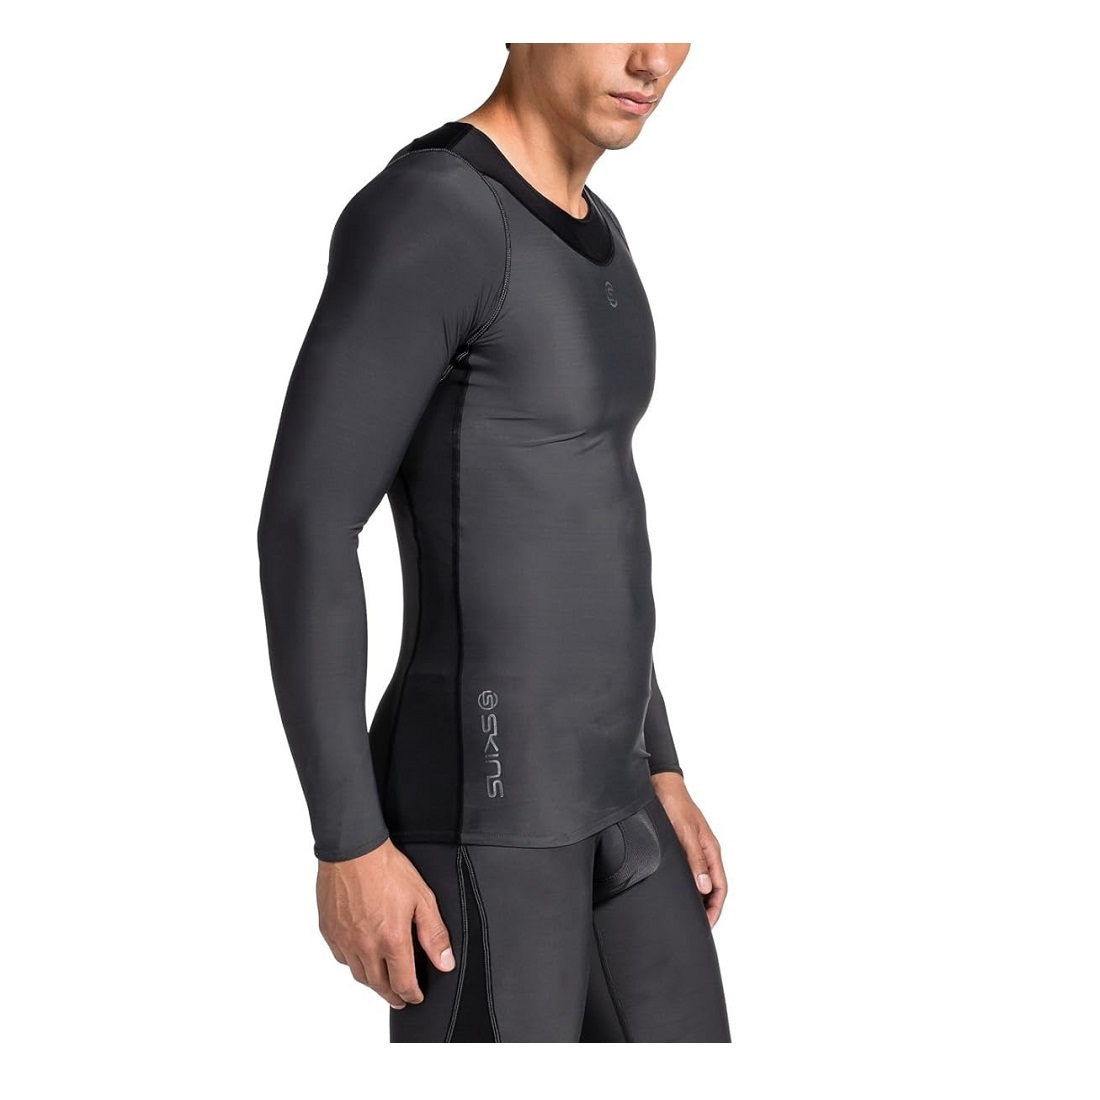 SKINS RY400 Men's Long Sleeve Top — Running Compression